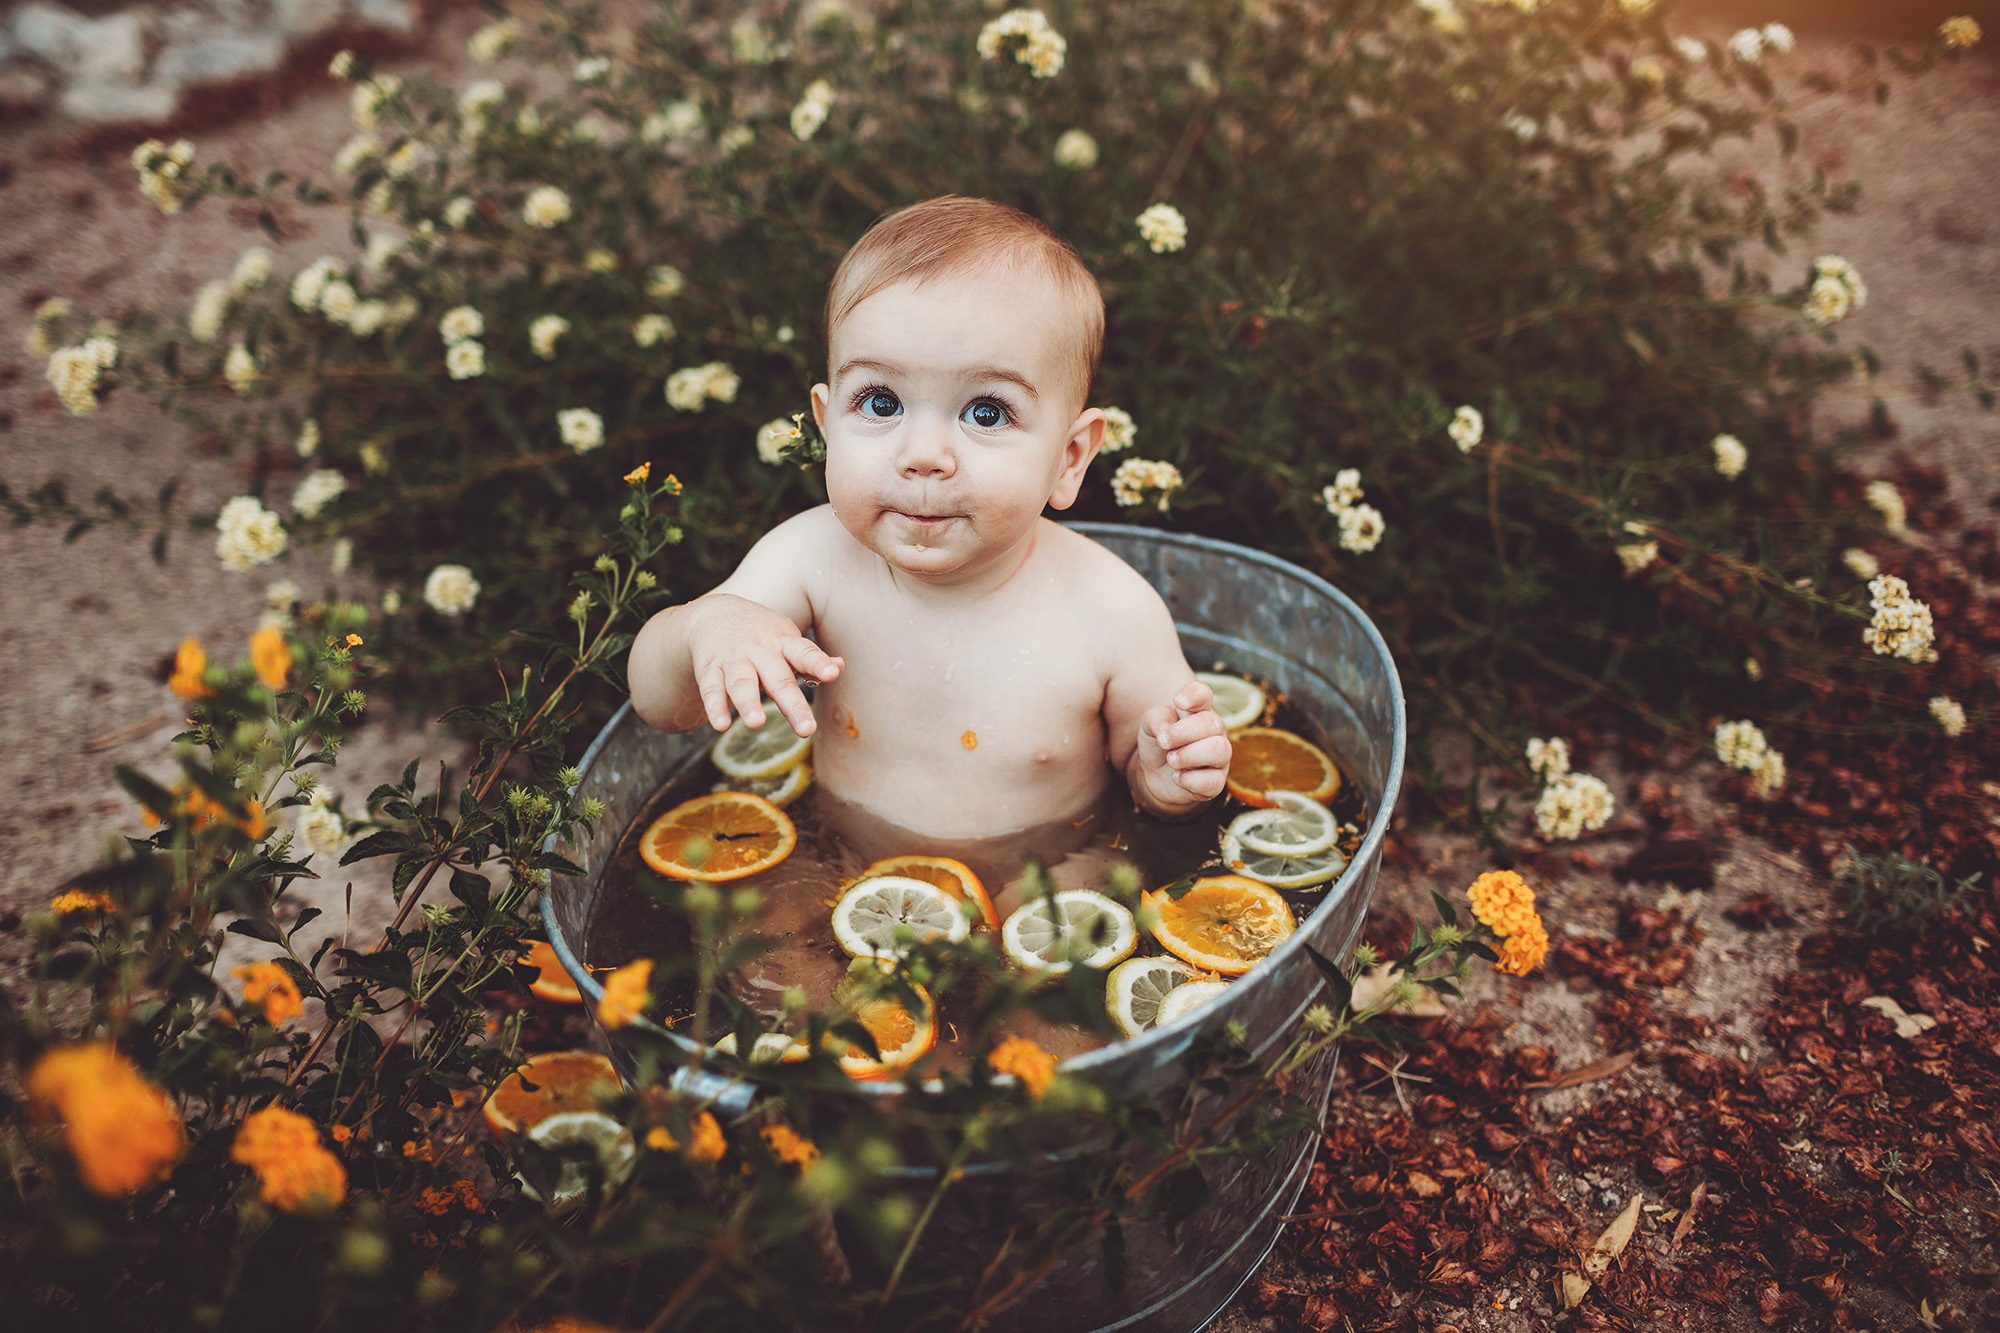 Baby Felix was so happy and was not ready to get out of his fruit bath by the end of our session